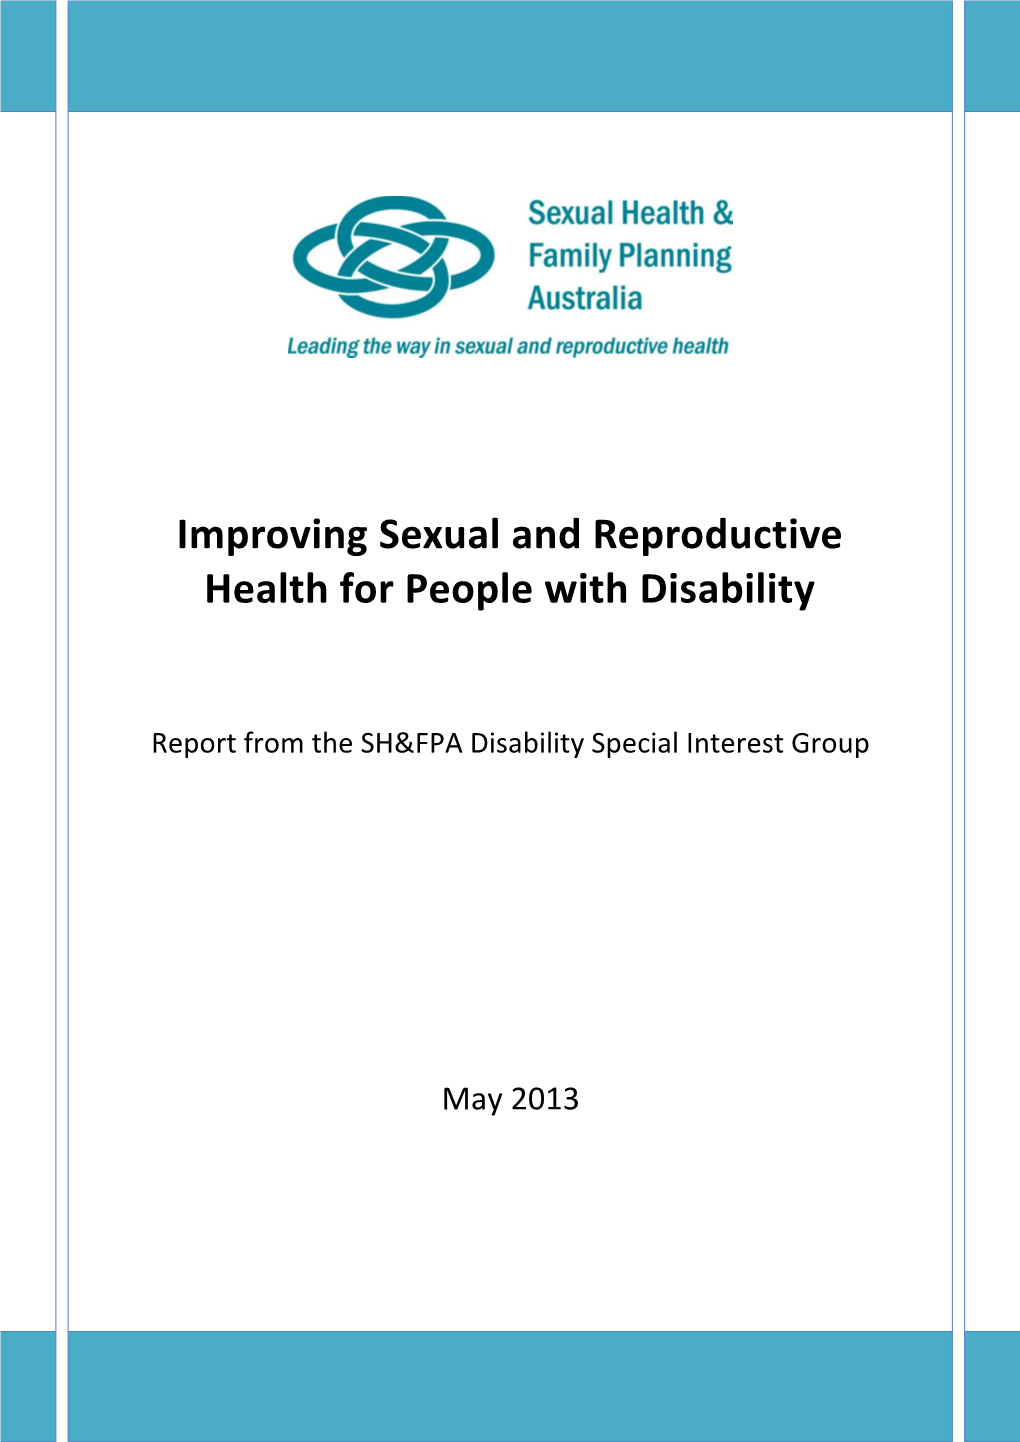 Improving Sexual and Reproductive Health for People with a Disability